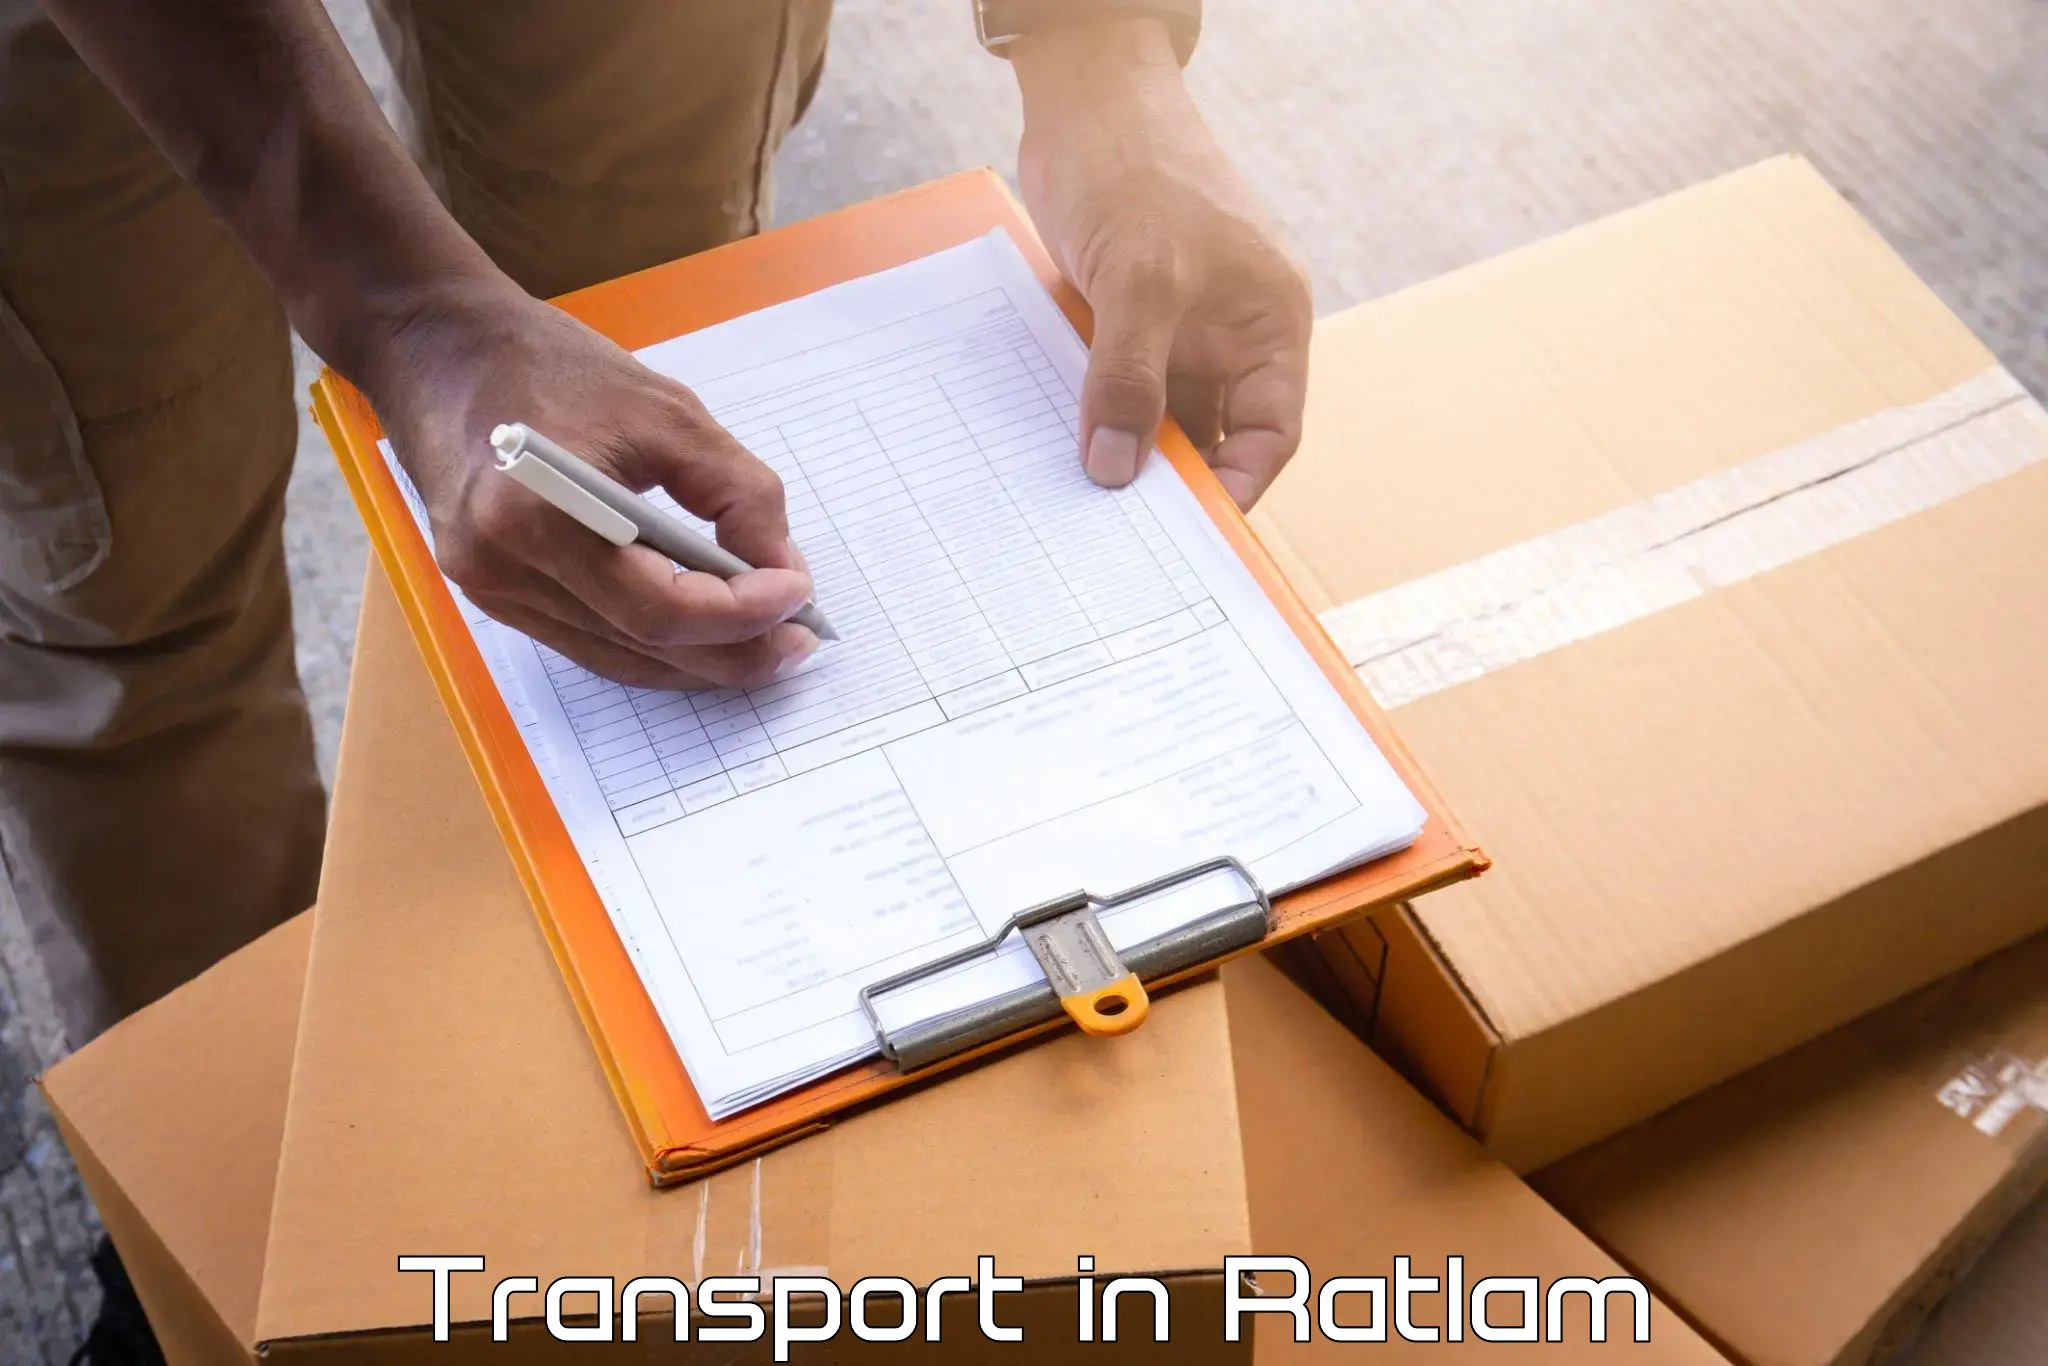 Container transportation services in Ratlam